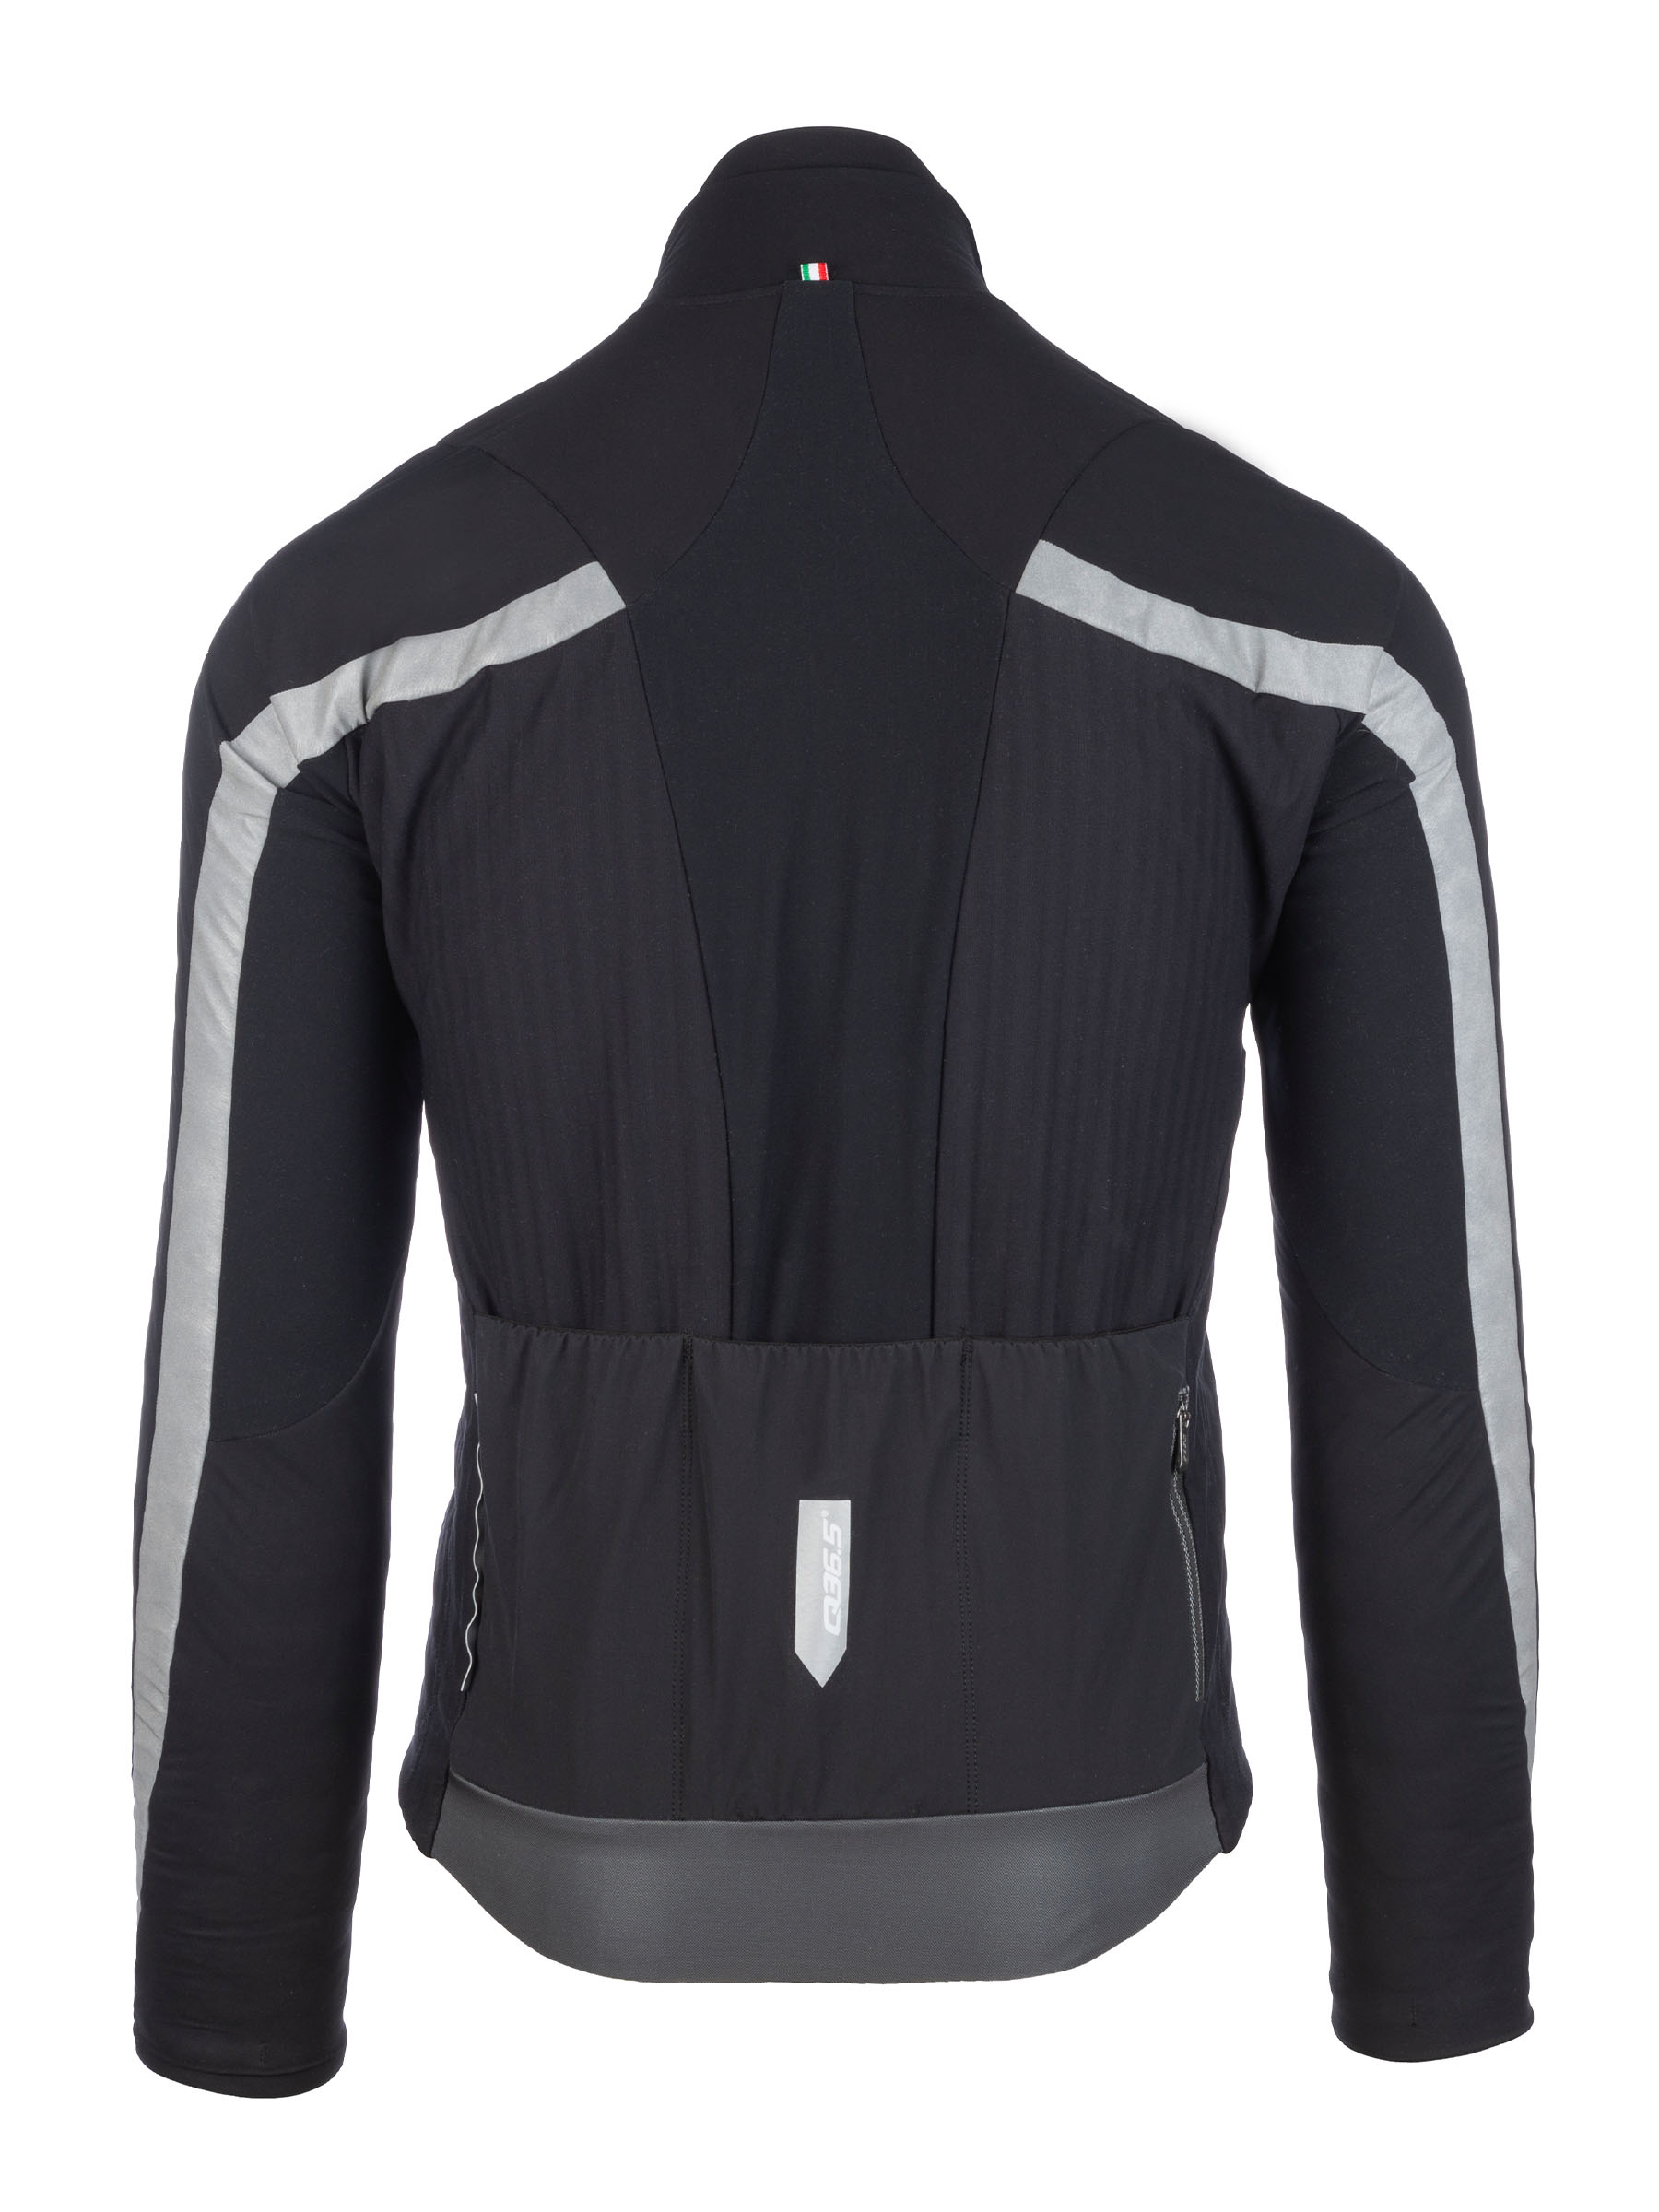 Jacket winter cycling • mens thermal for Interval black, Termica jacket